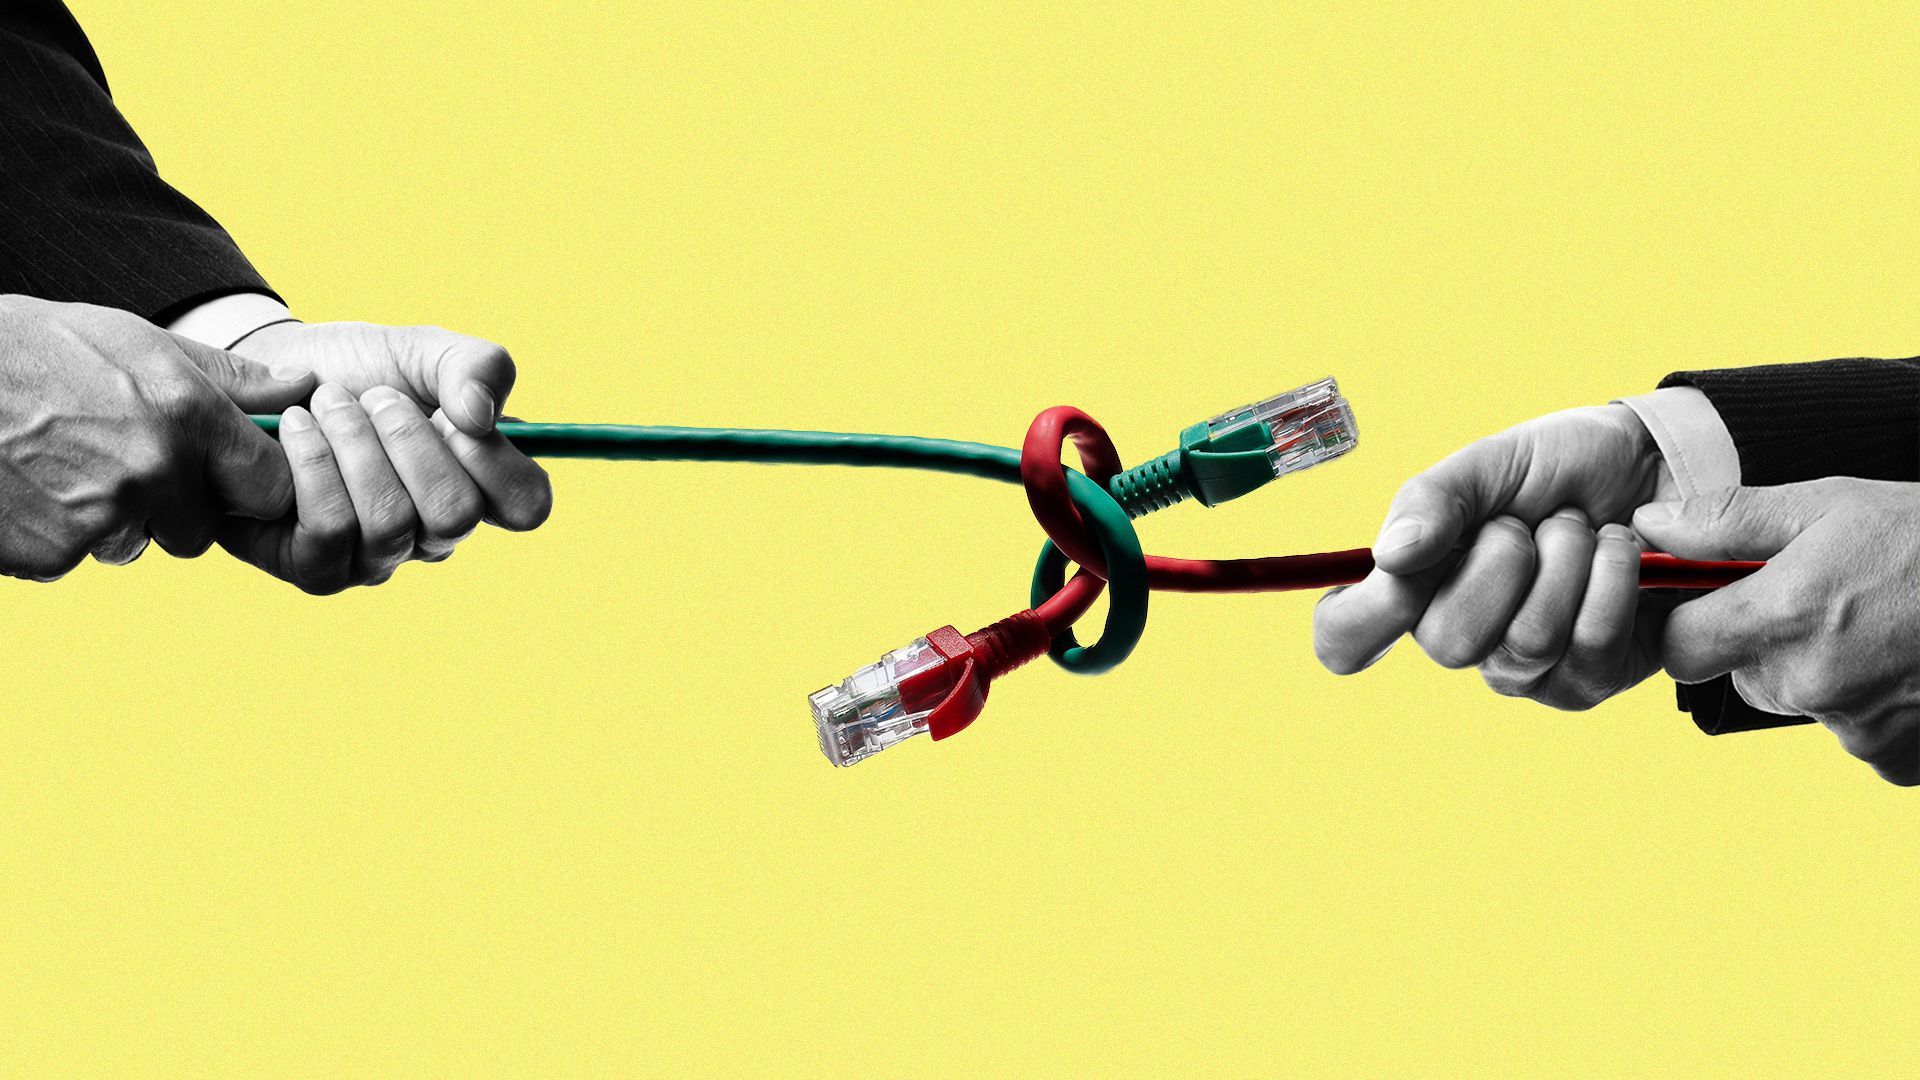 Tug of war over internet cable